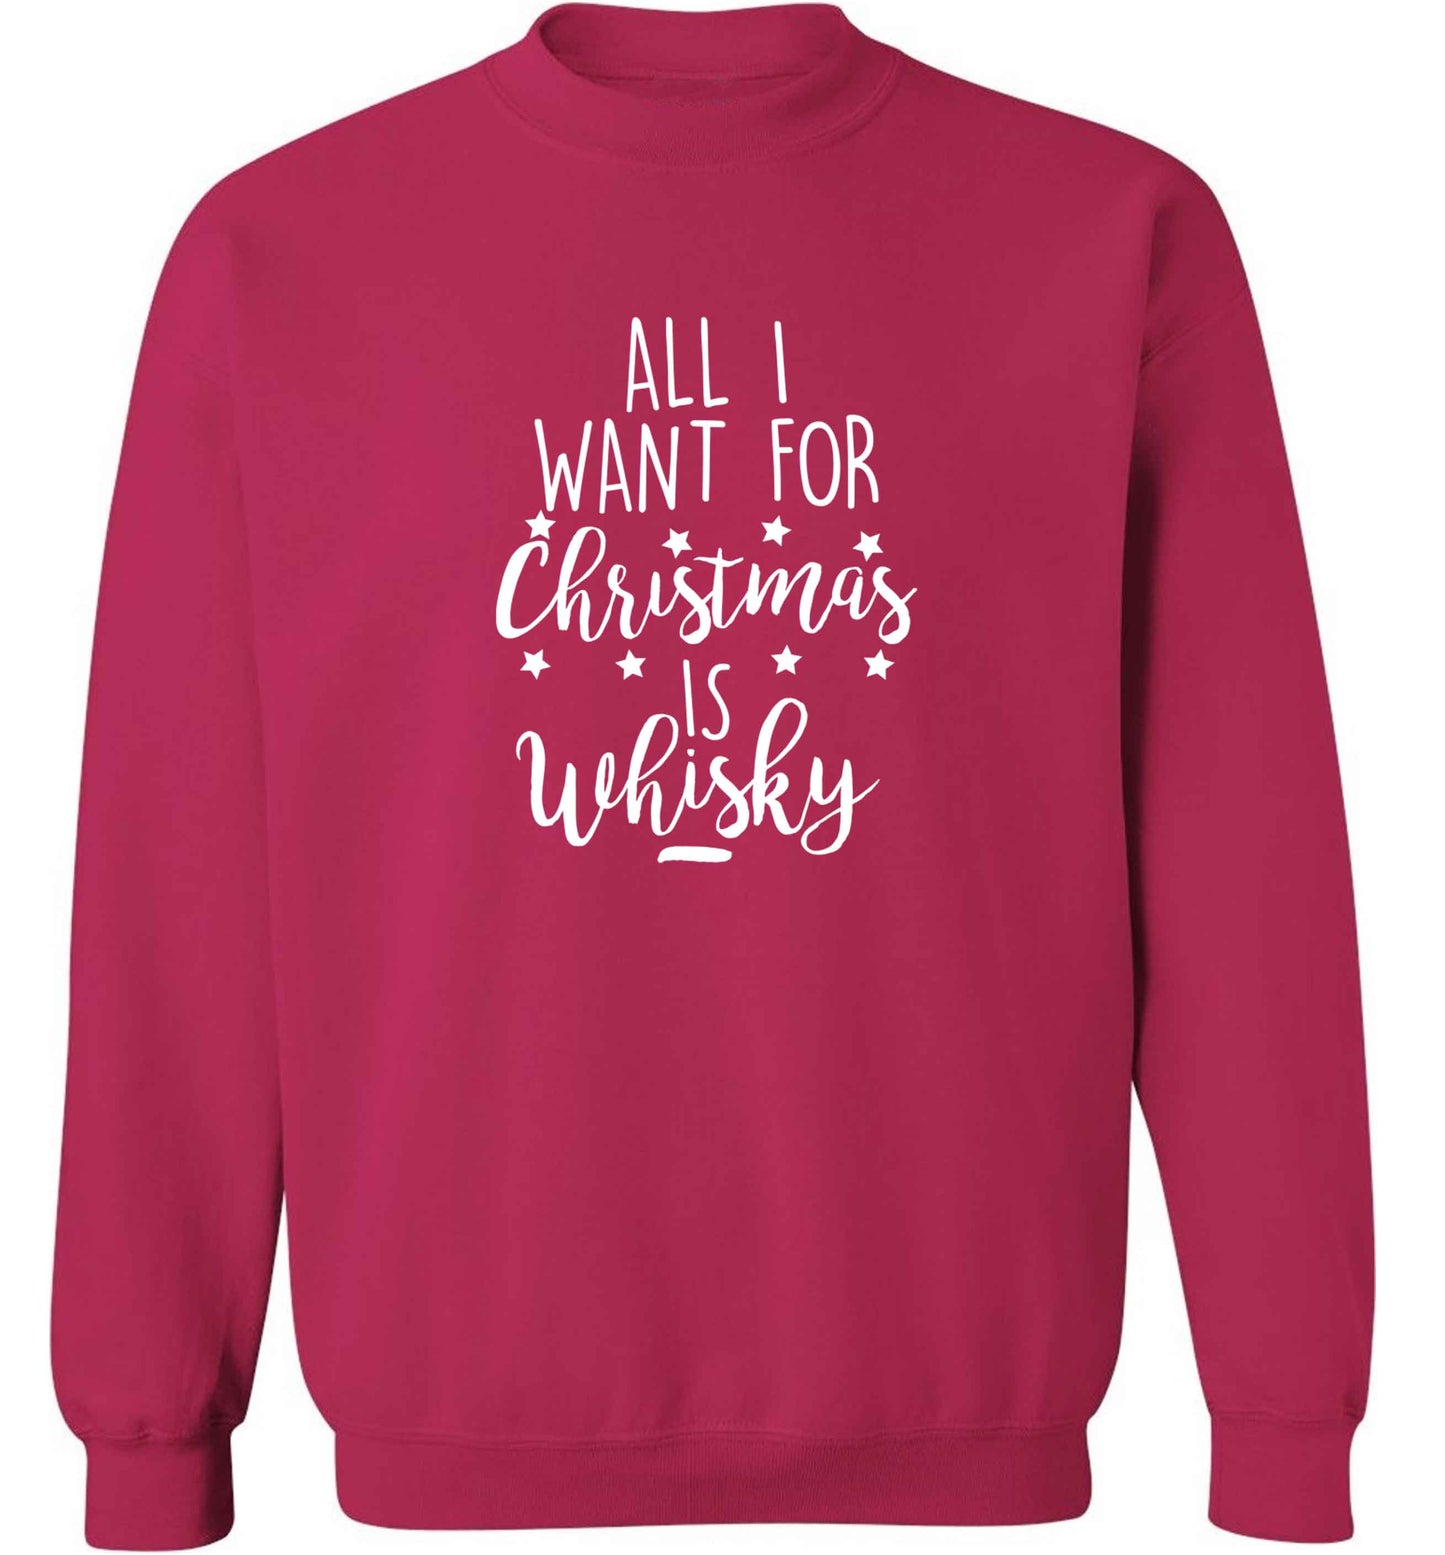 All I want for Christmas is whisky adult's unisex pink sweater 2XL